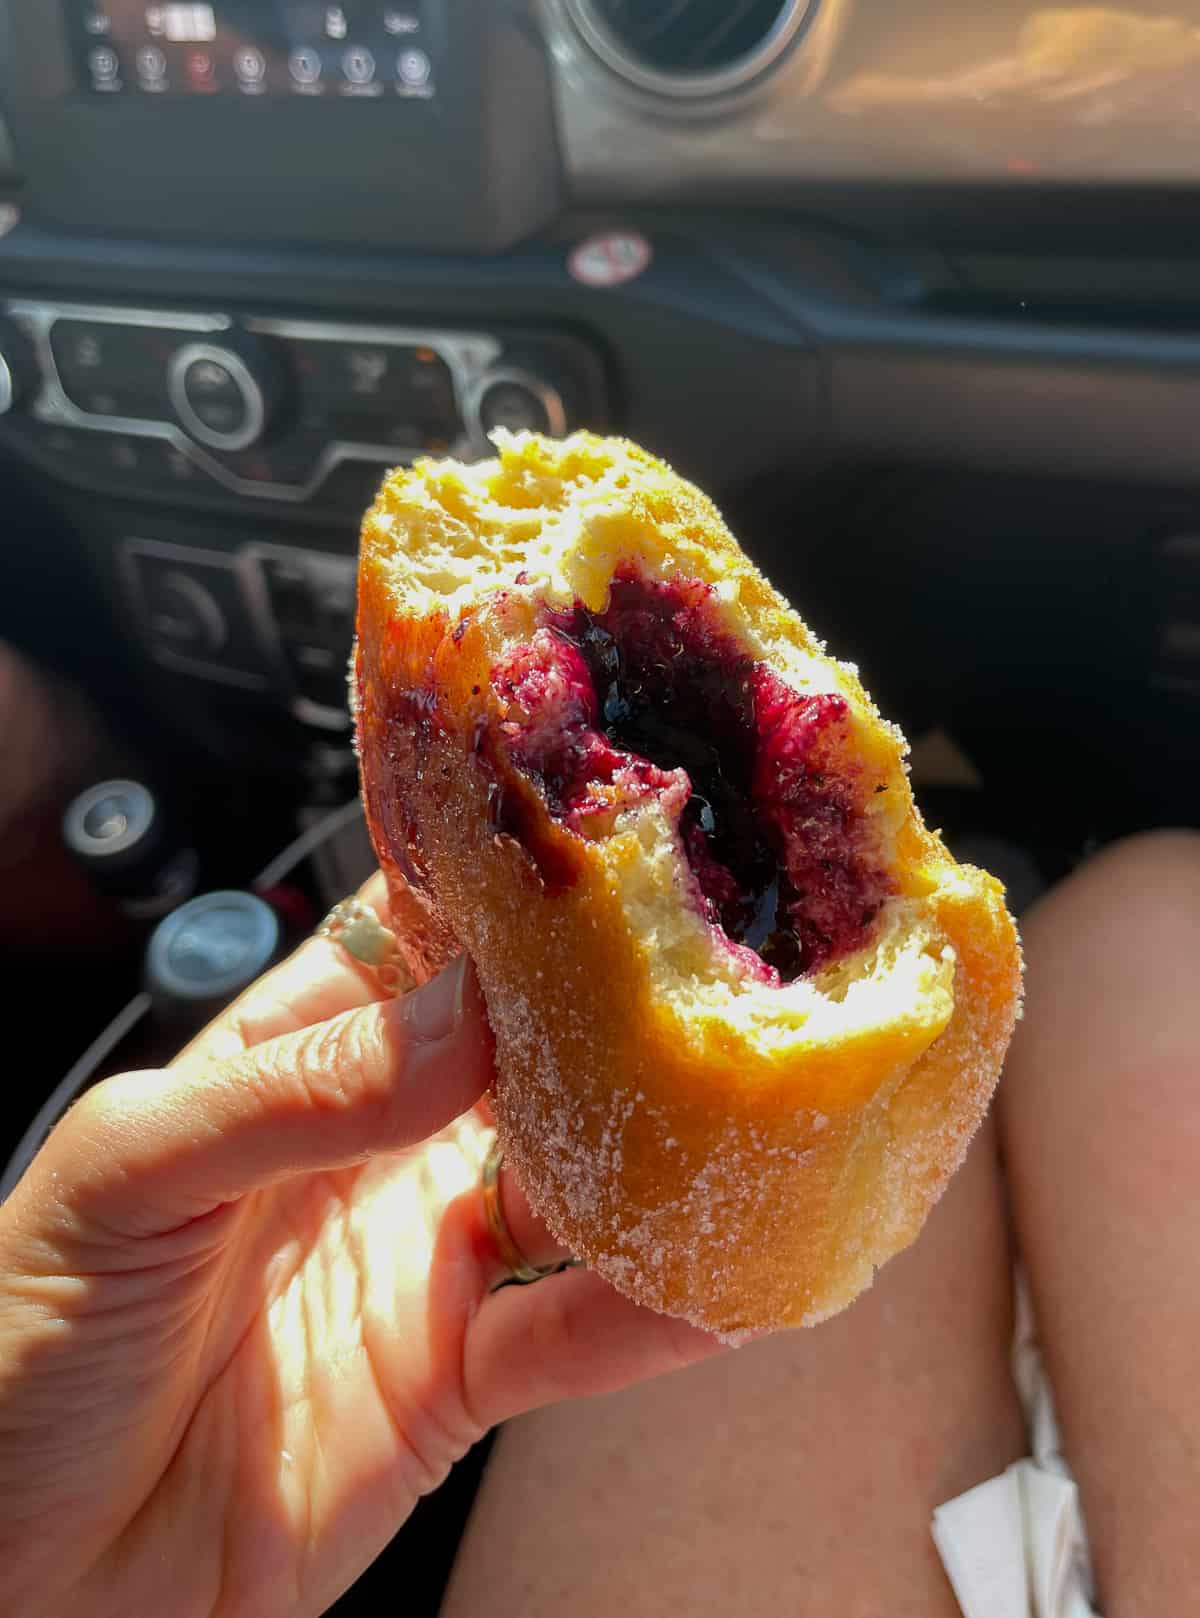 Me holding a berry malasada in the car.